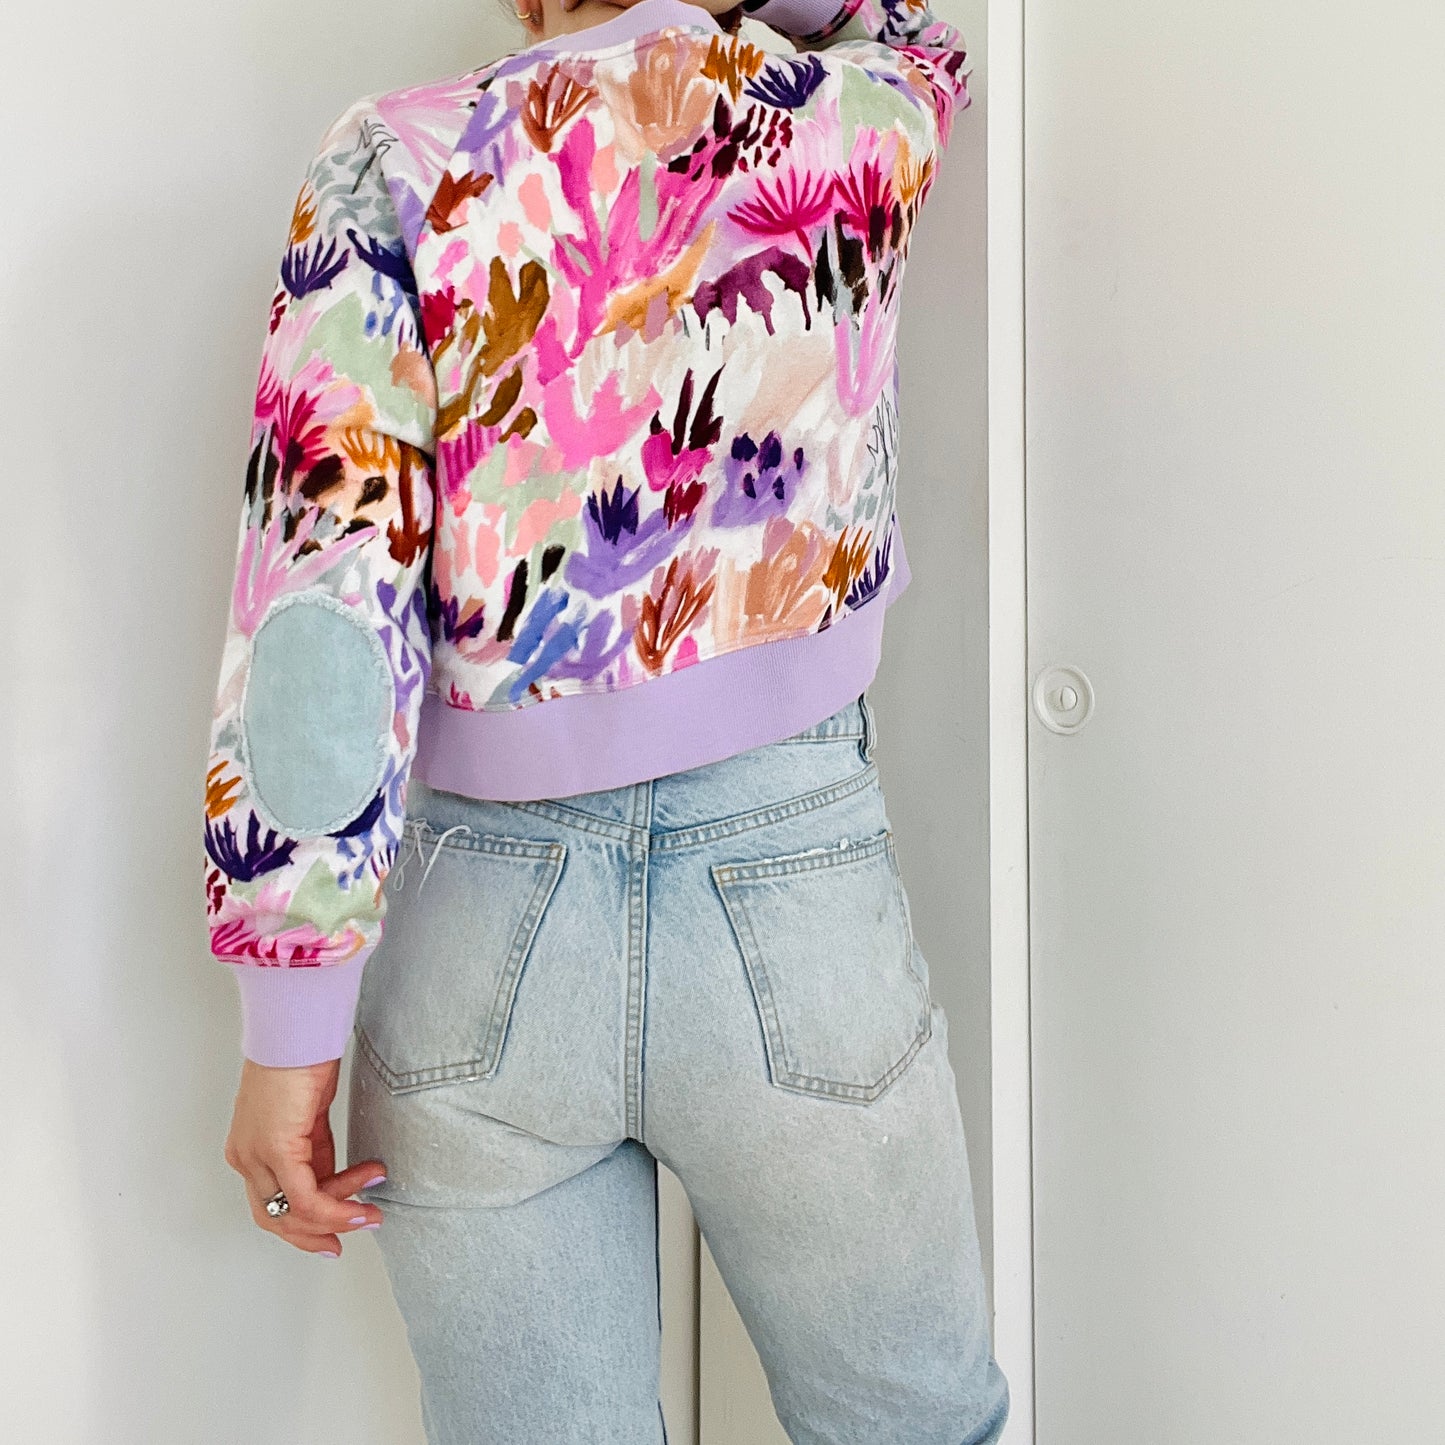 CROPPED SWEATER IN WILDFLOWER